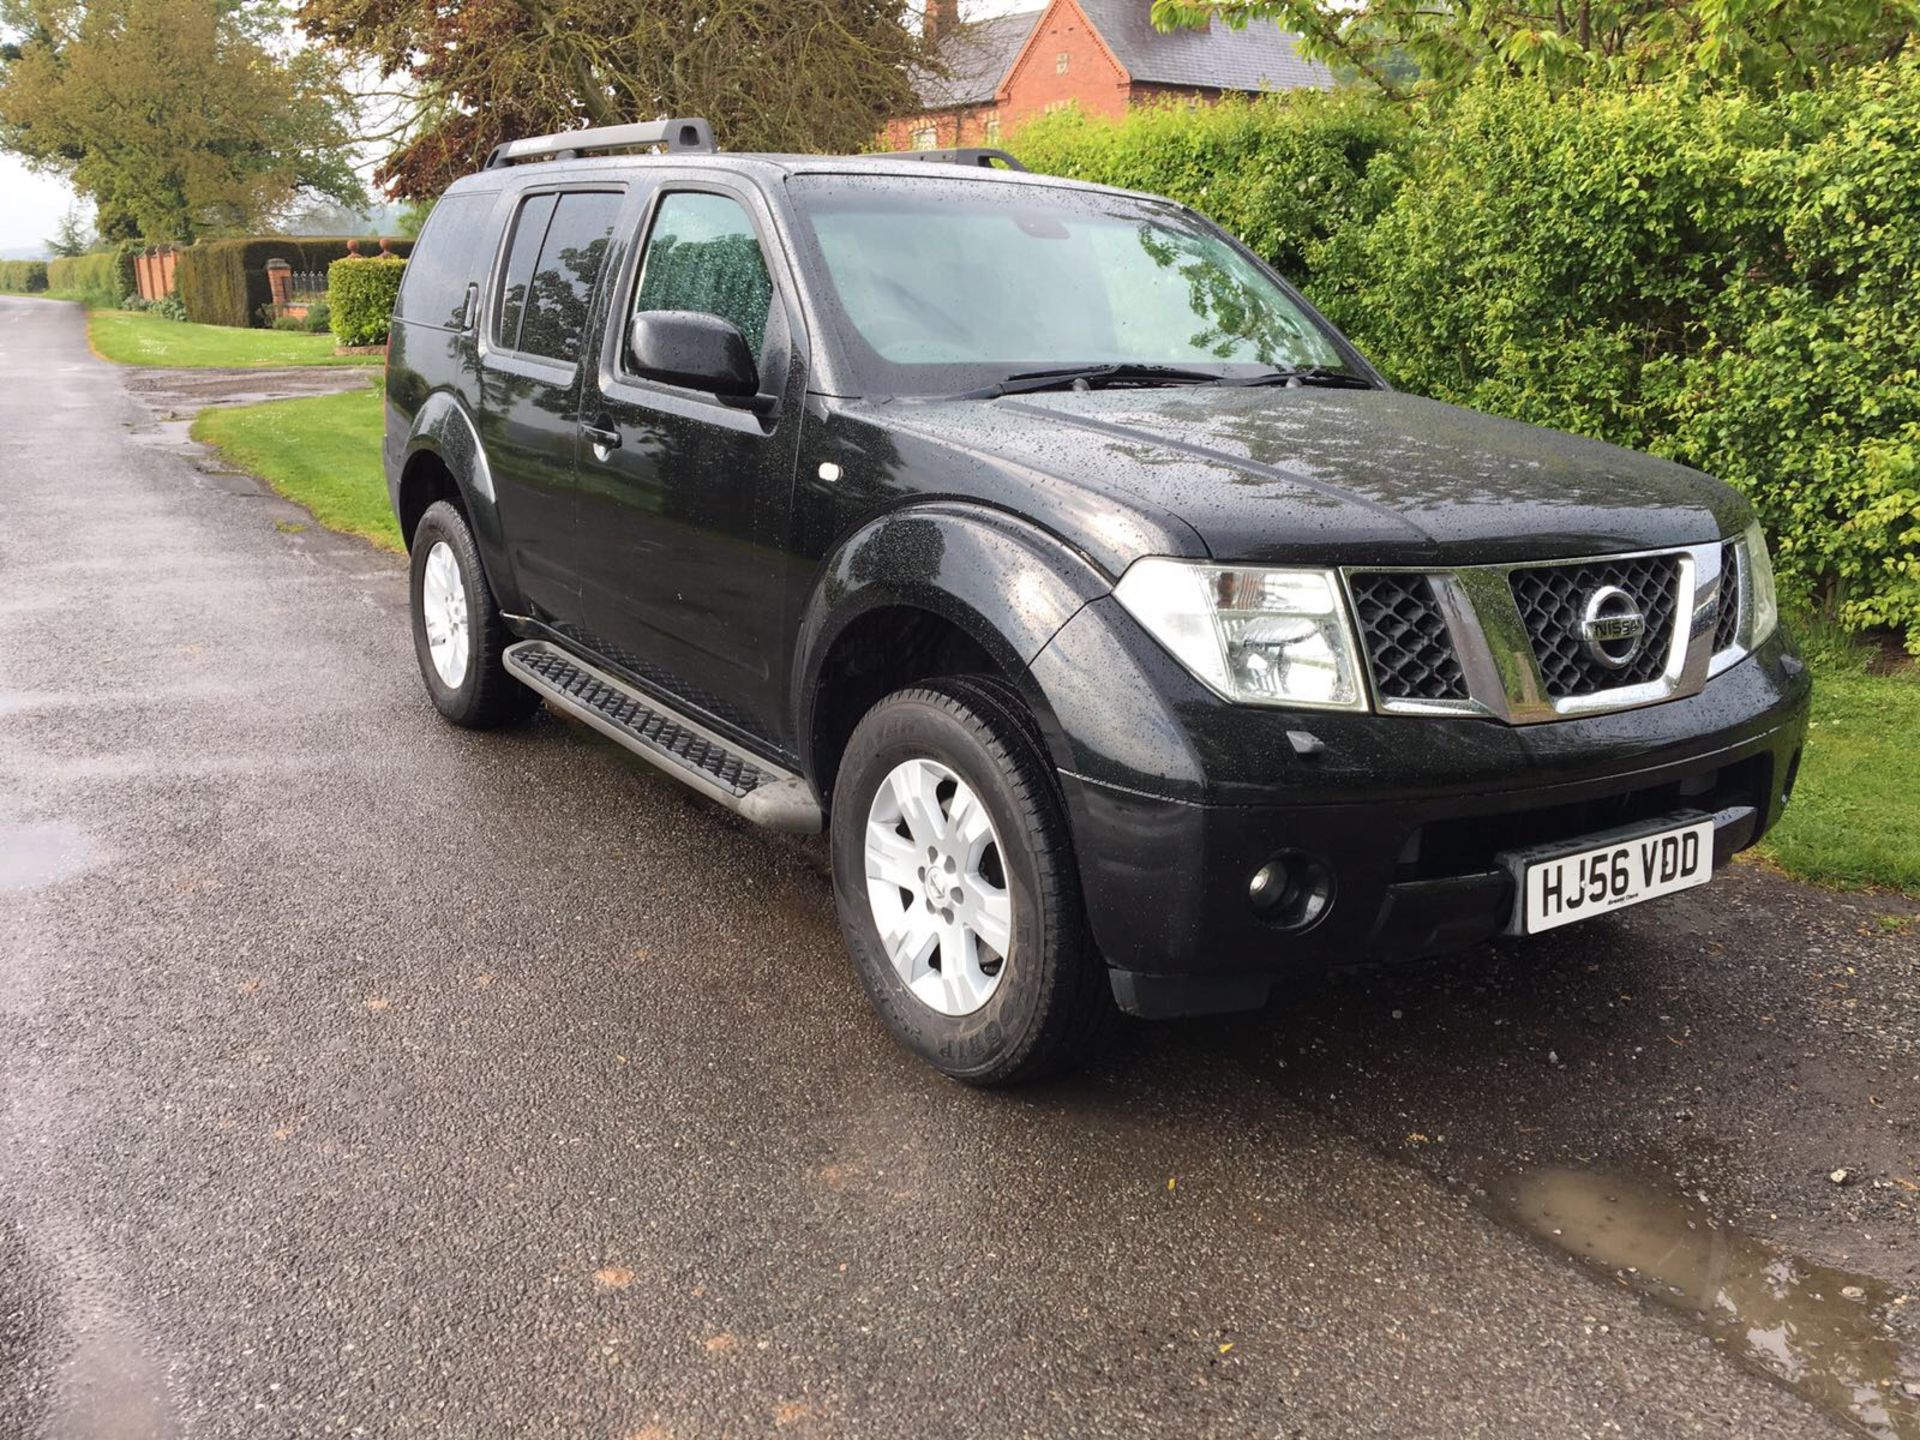 KB - 2006/56 REG NISSAN PATHFINDER AVENTURA DCI AUTOMATIC 7 SEATER    DATE OF REGISTRATION: 6TH